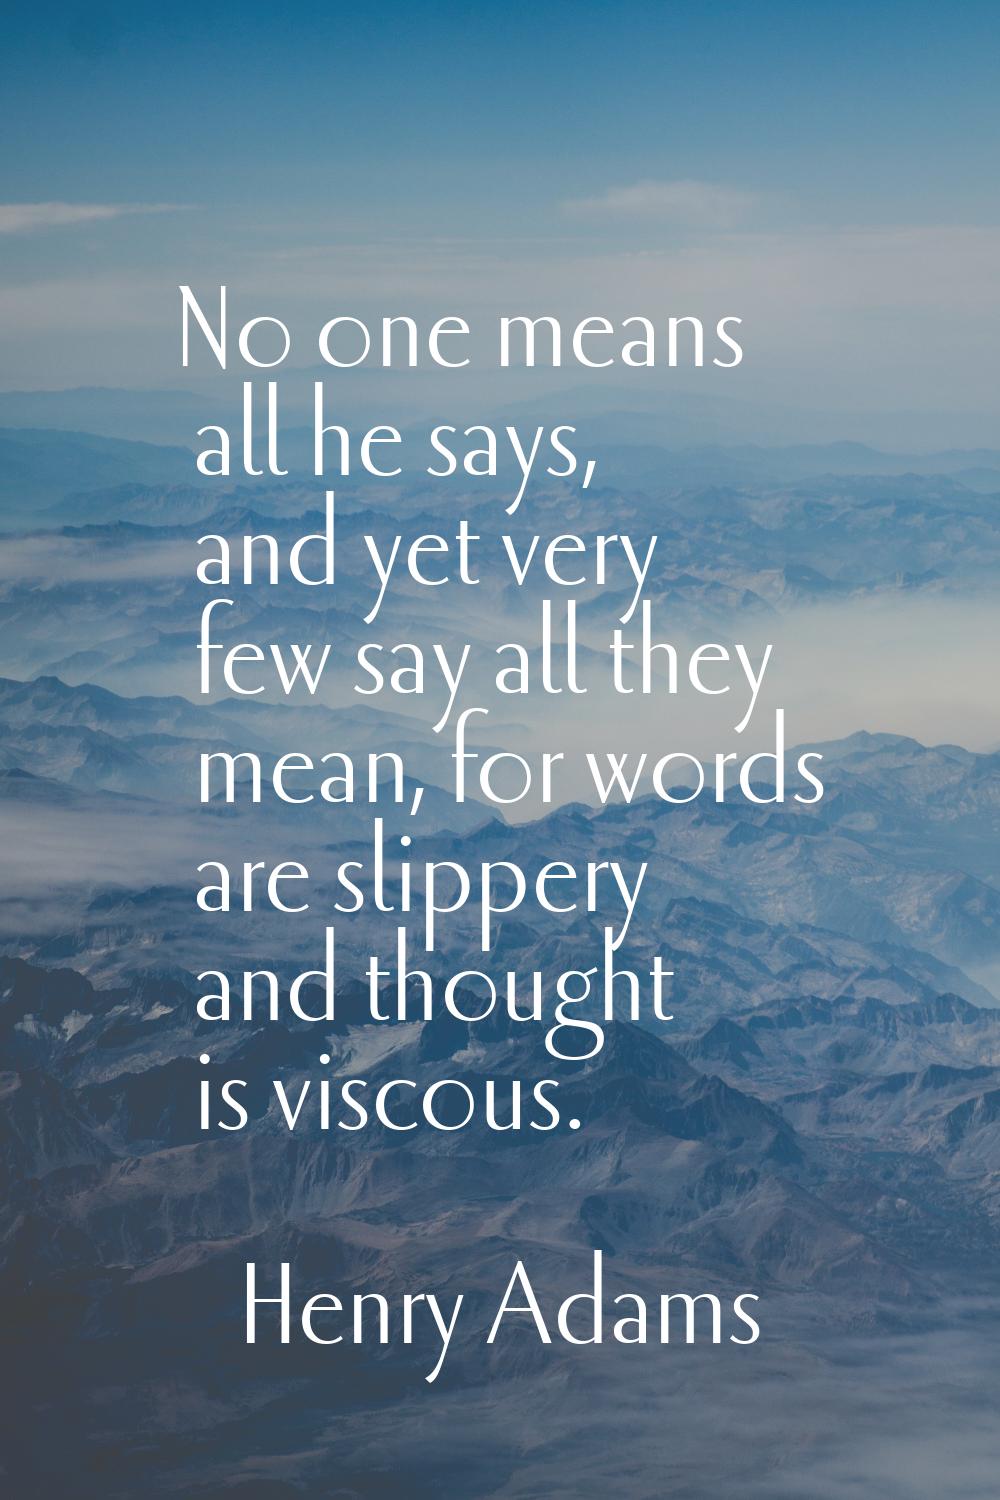 No one means all he says, and yet very few say all they mean, for words are slippery and thought is